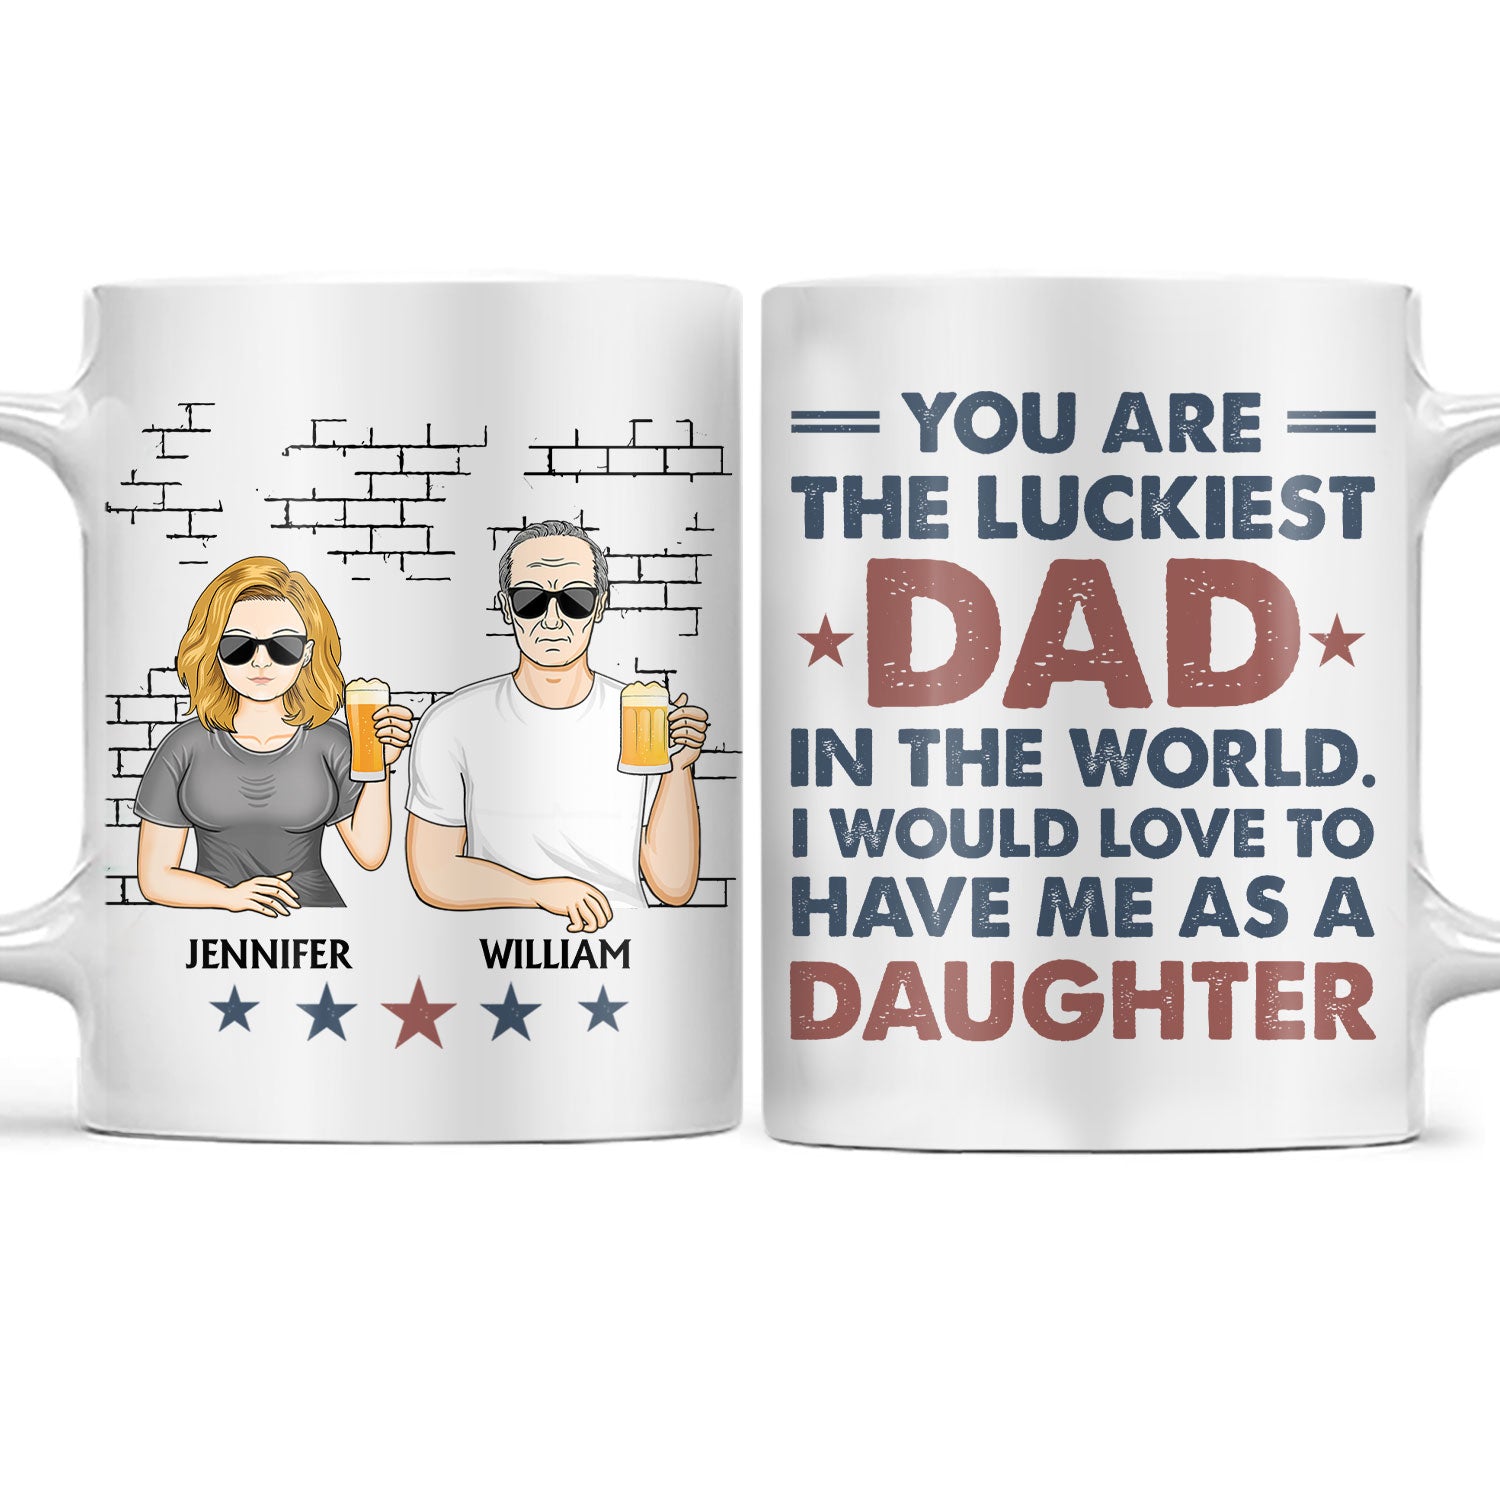 You Are The Luckiest Dad In The World - Funny, Birthday Gift For Father, Papa, Husband - Personalized Custom White Edge-to-Edge Mug